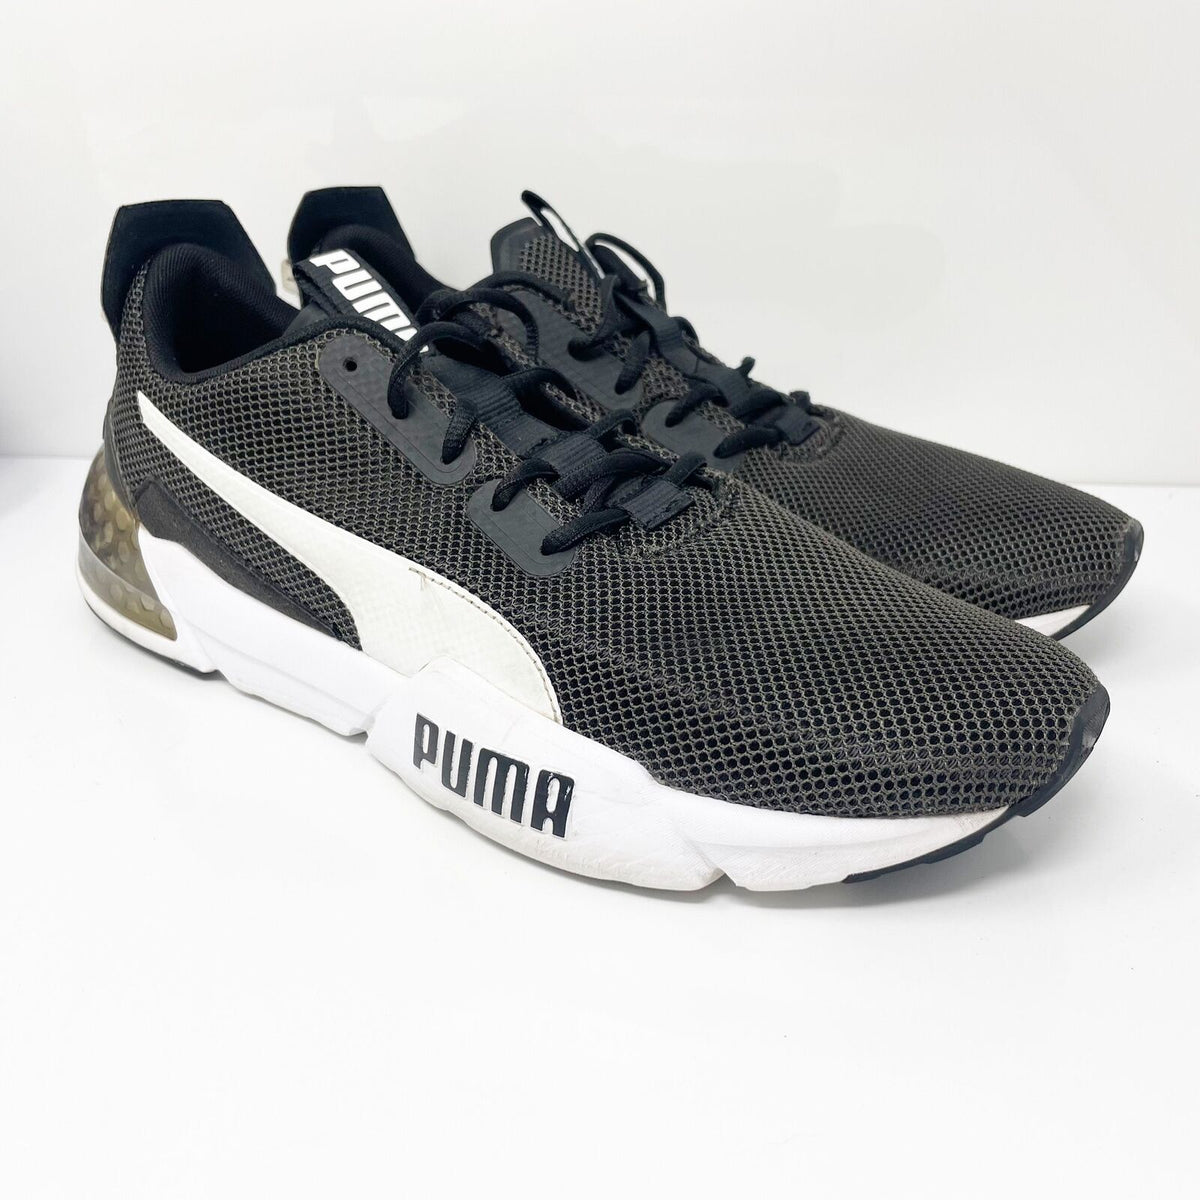 Puma Mens Cell 192638-02 Black Running Shoes Sneakers Size SneakerCycle